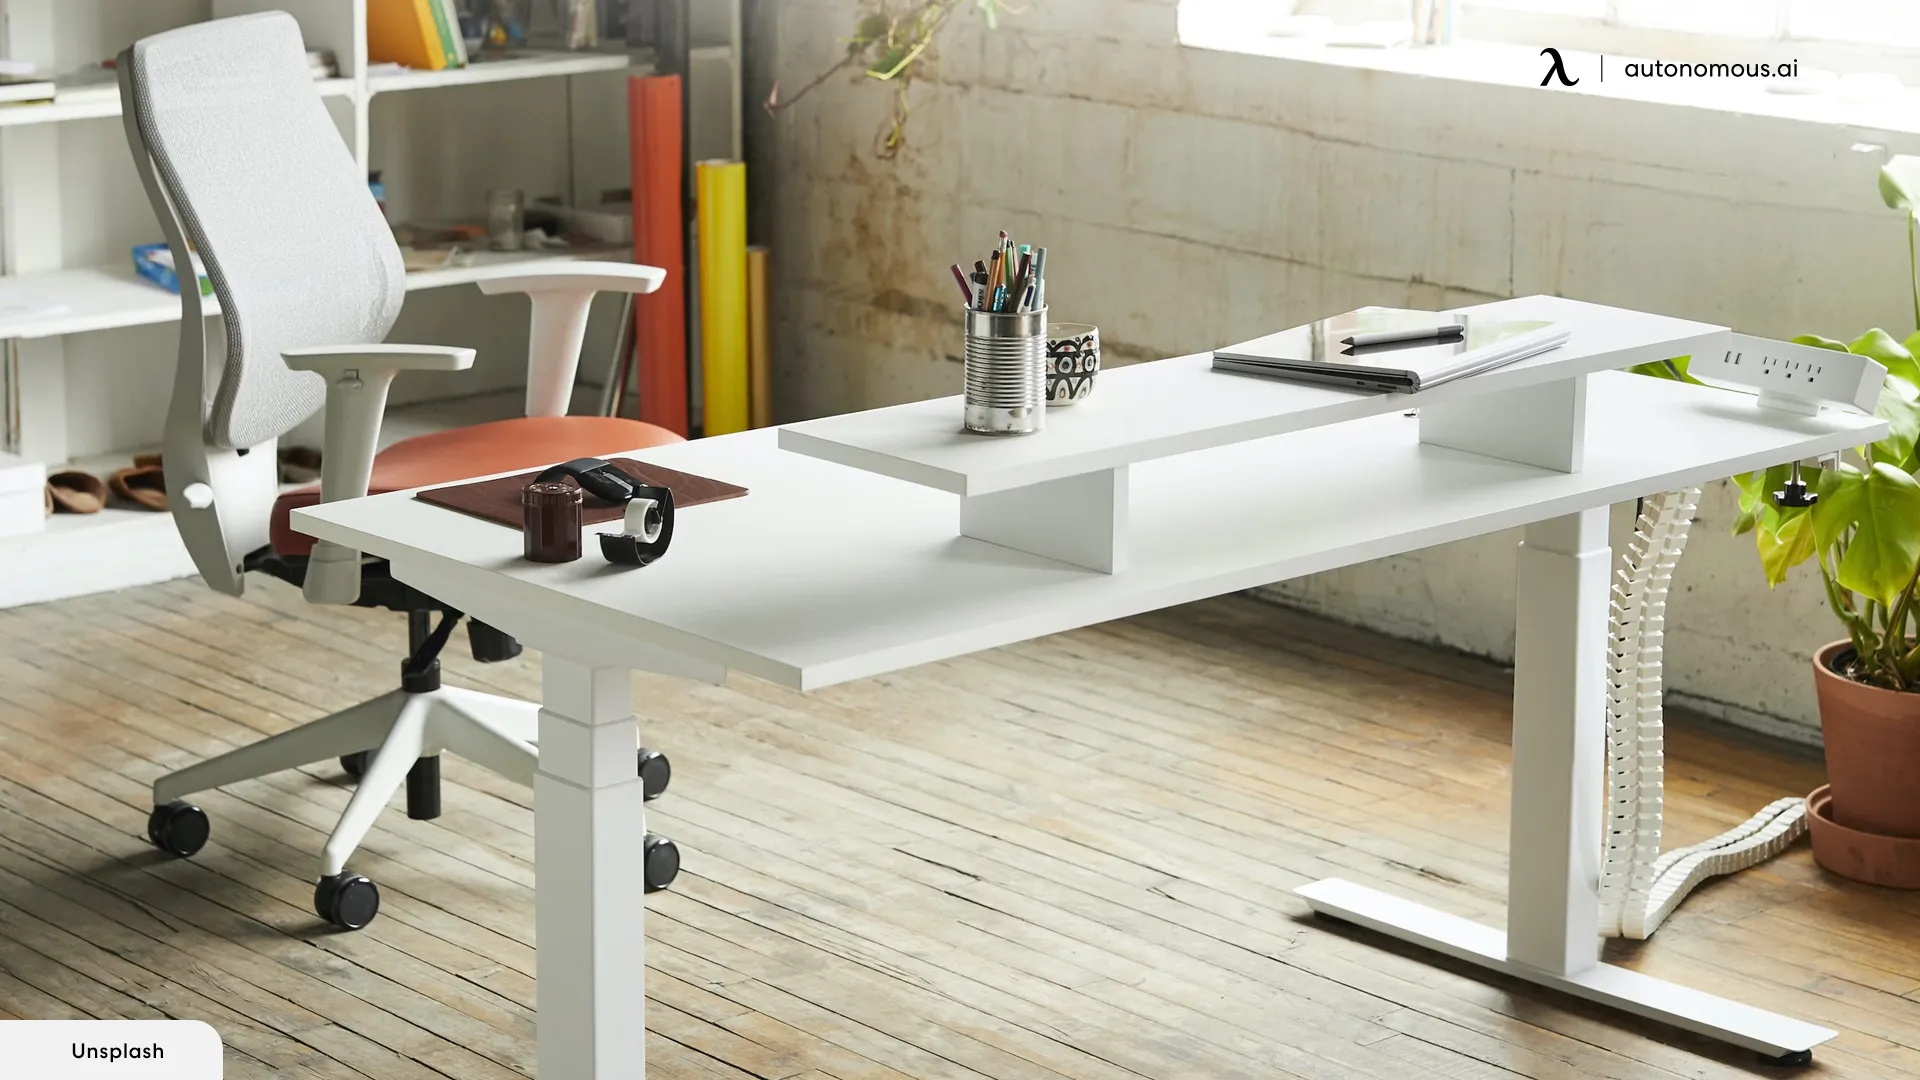 What to Look for in an Adjustable Sit-Stand Desk